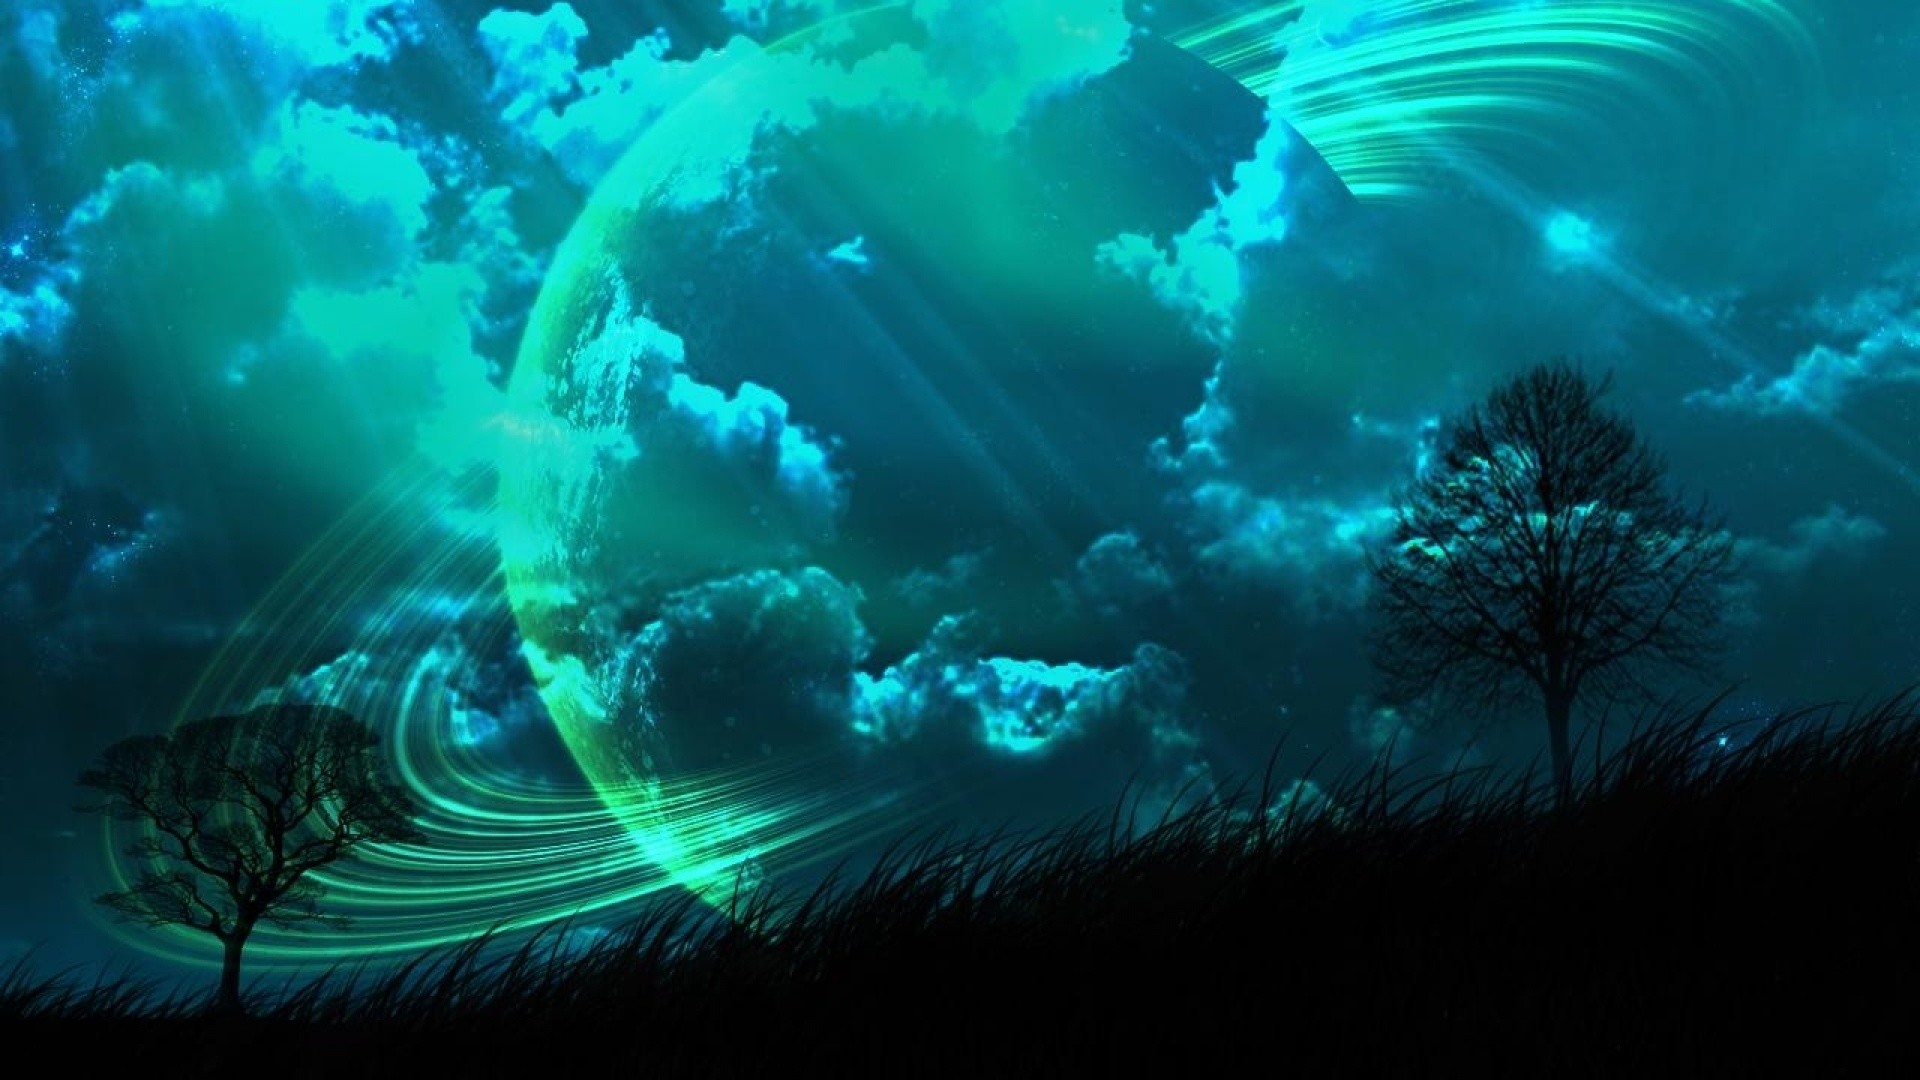 1920x1080 abstract planet dark nature teal wallpapers desktop images download windows  wallpapers amazing colourful 4k picture artwork lovely 1920Ã1080 Wallpaper  HD